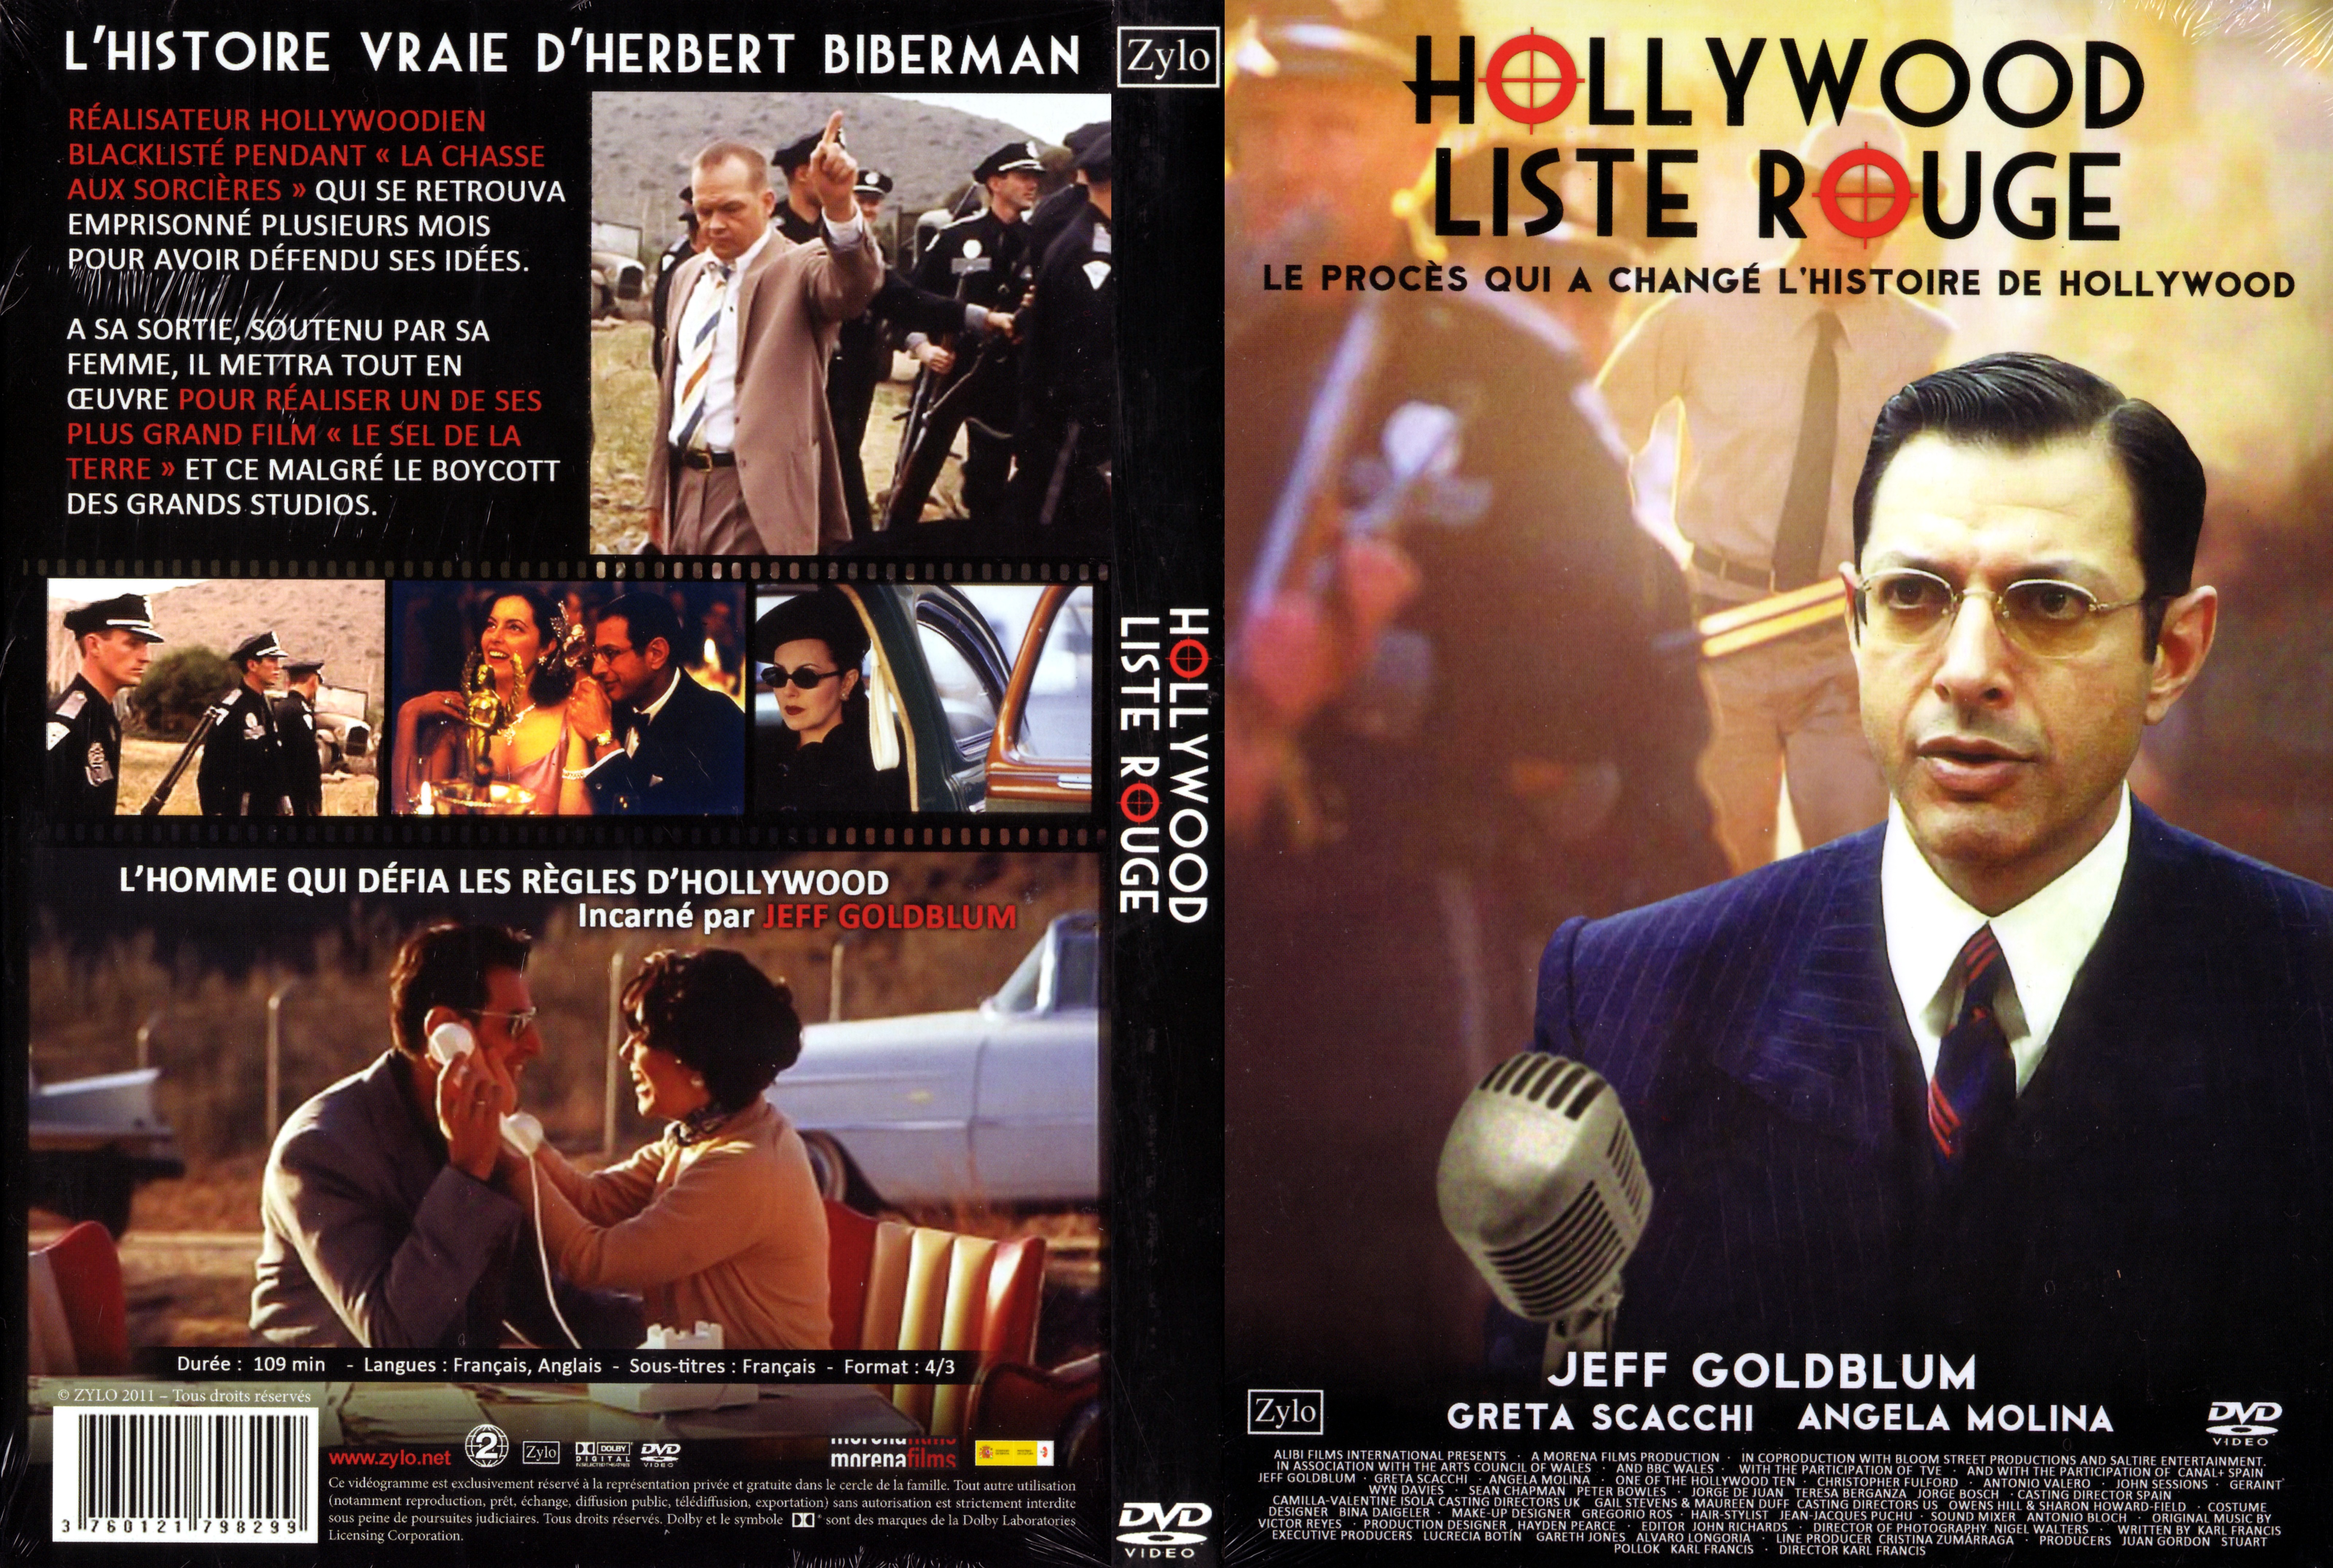 Jaquette DVD Hollywood liste rouge